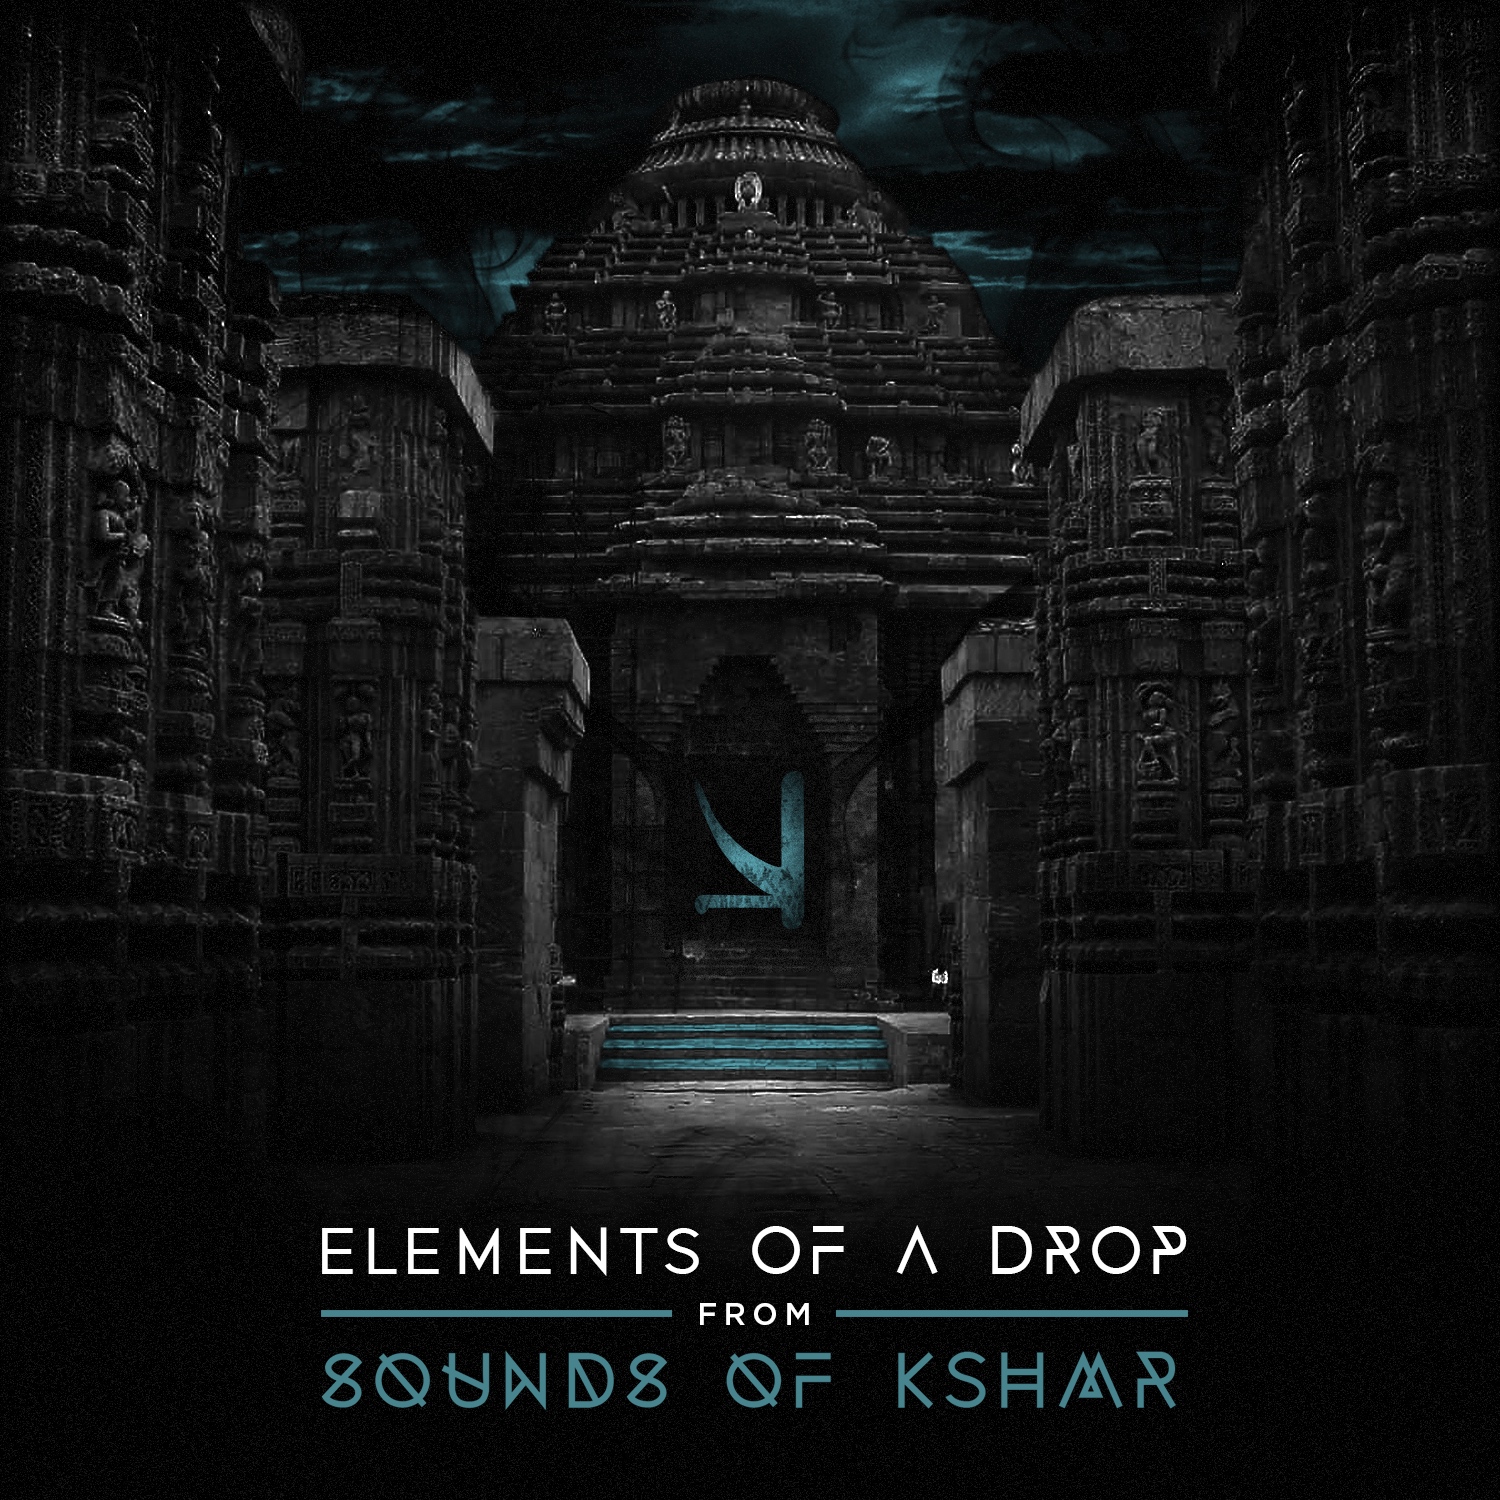 Elements of a Drop from Sounds of KSHMR